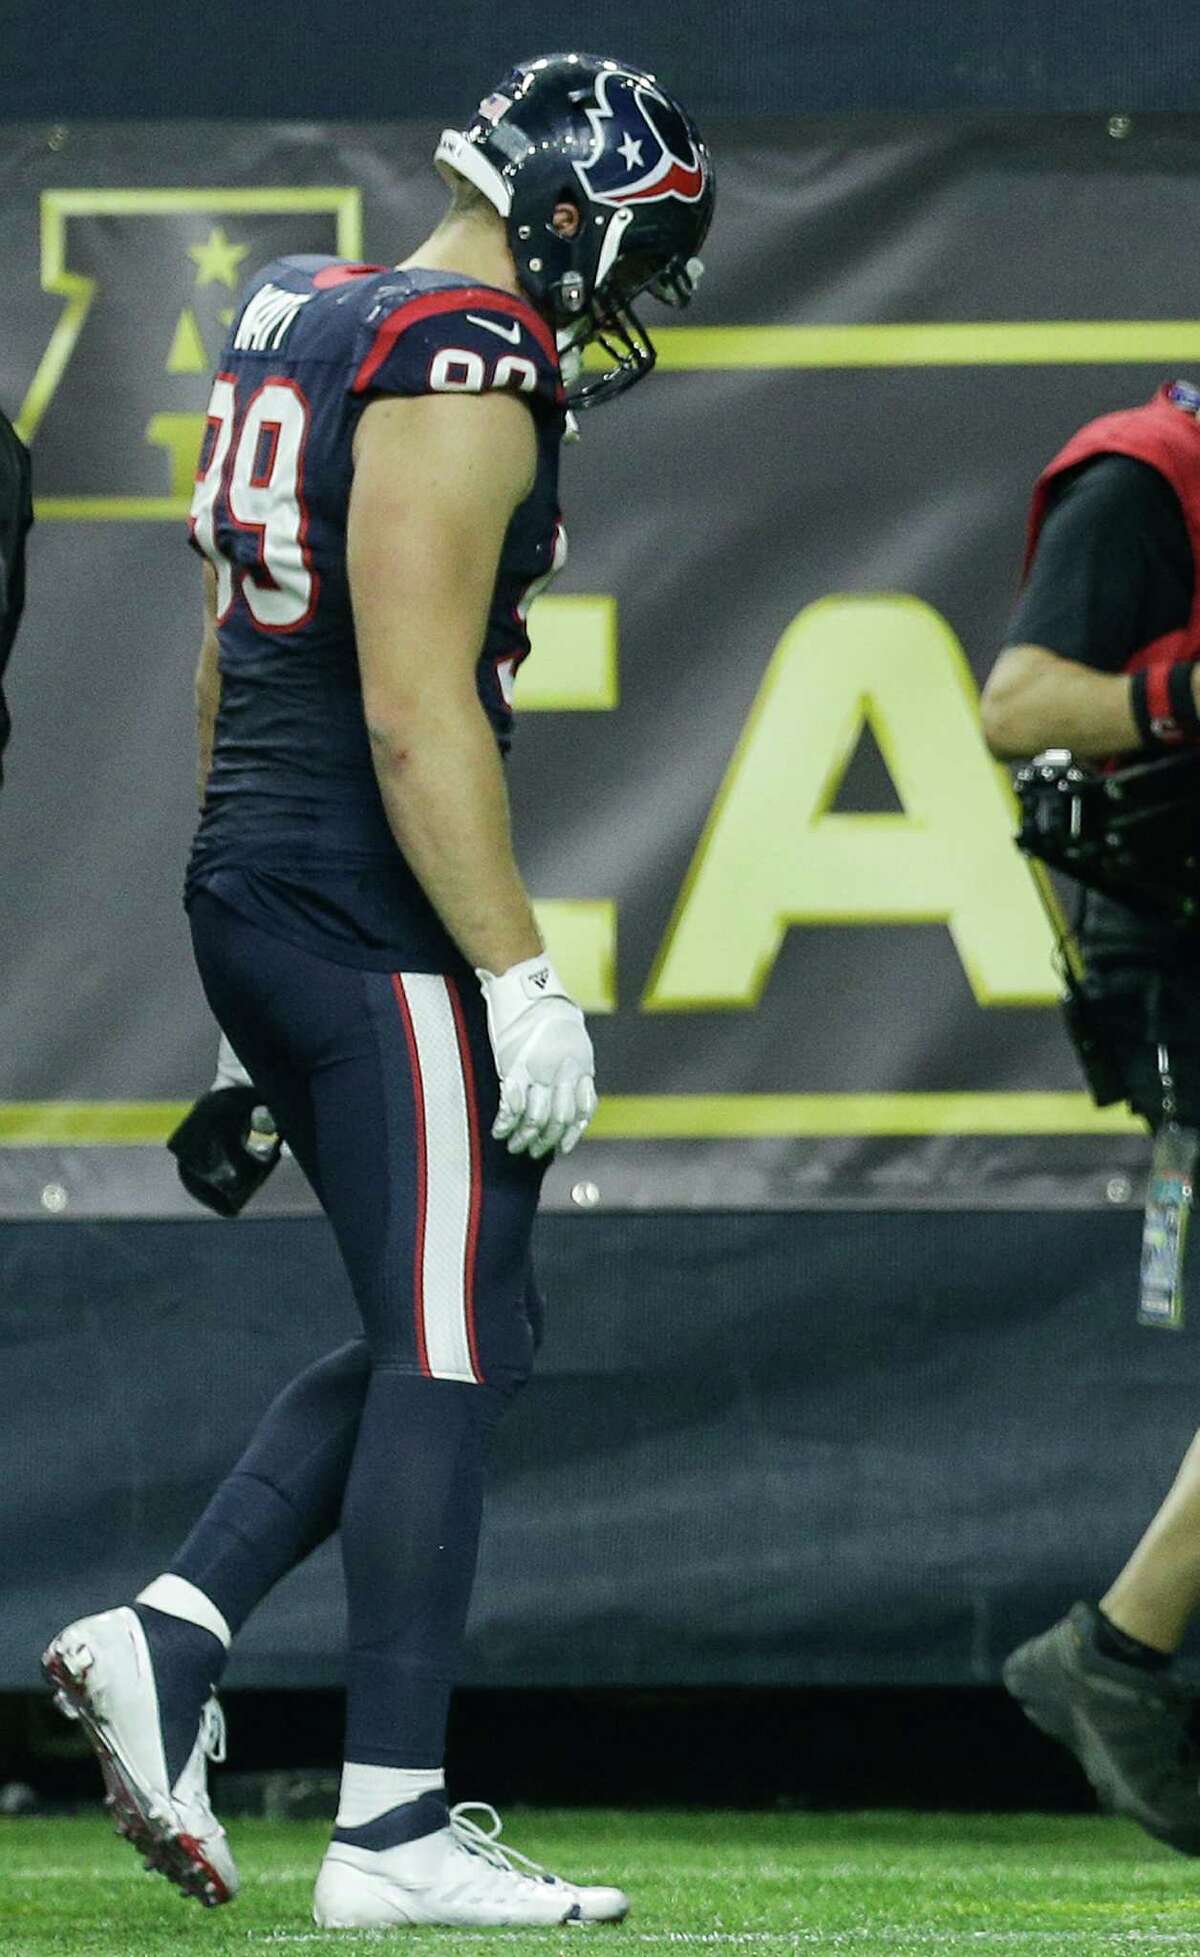 J.J. Watt gingerly leaves the field after suffering a groin injury during the Texans' playoff loss to the Chiefs last season.